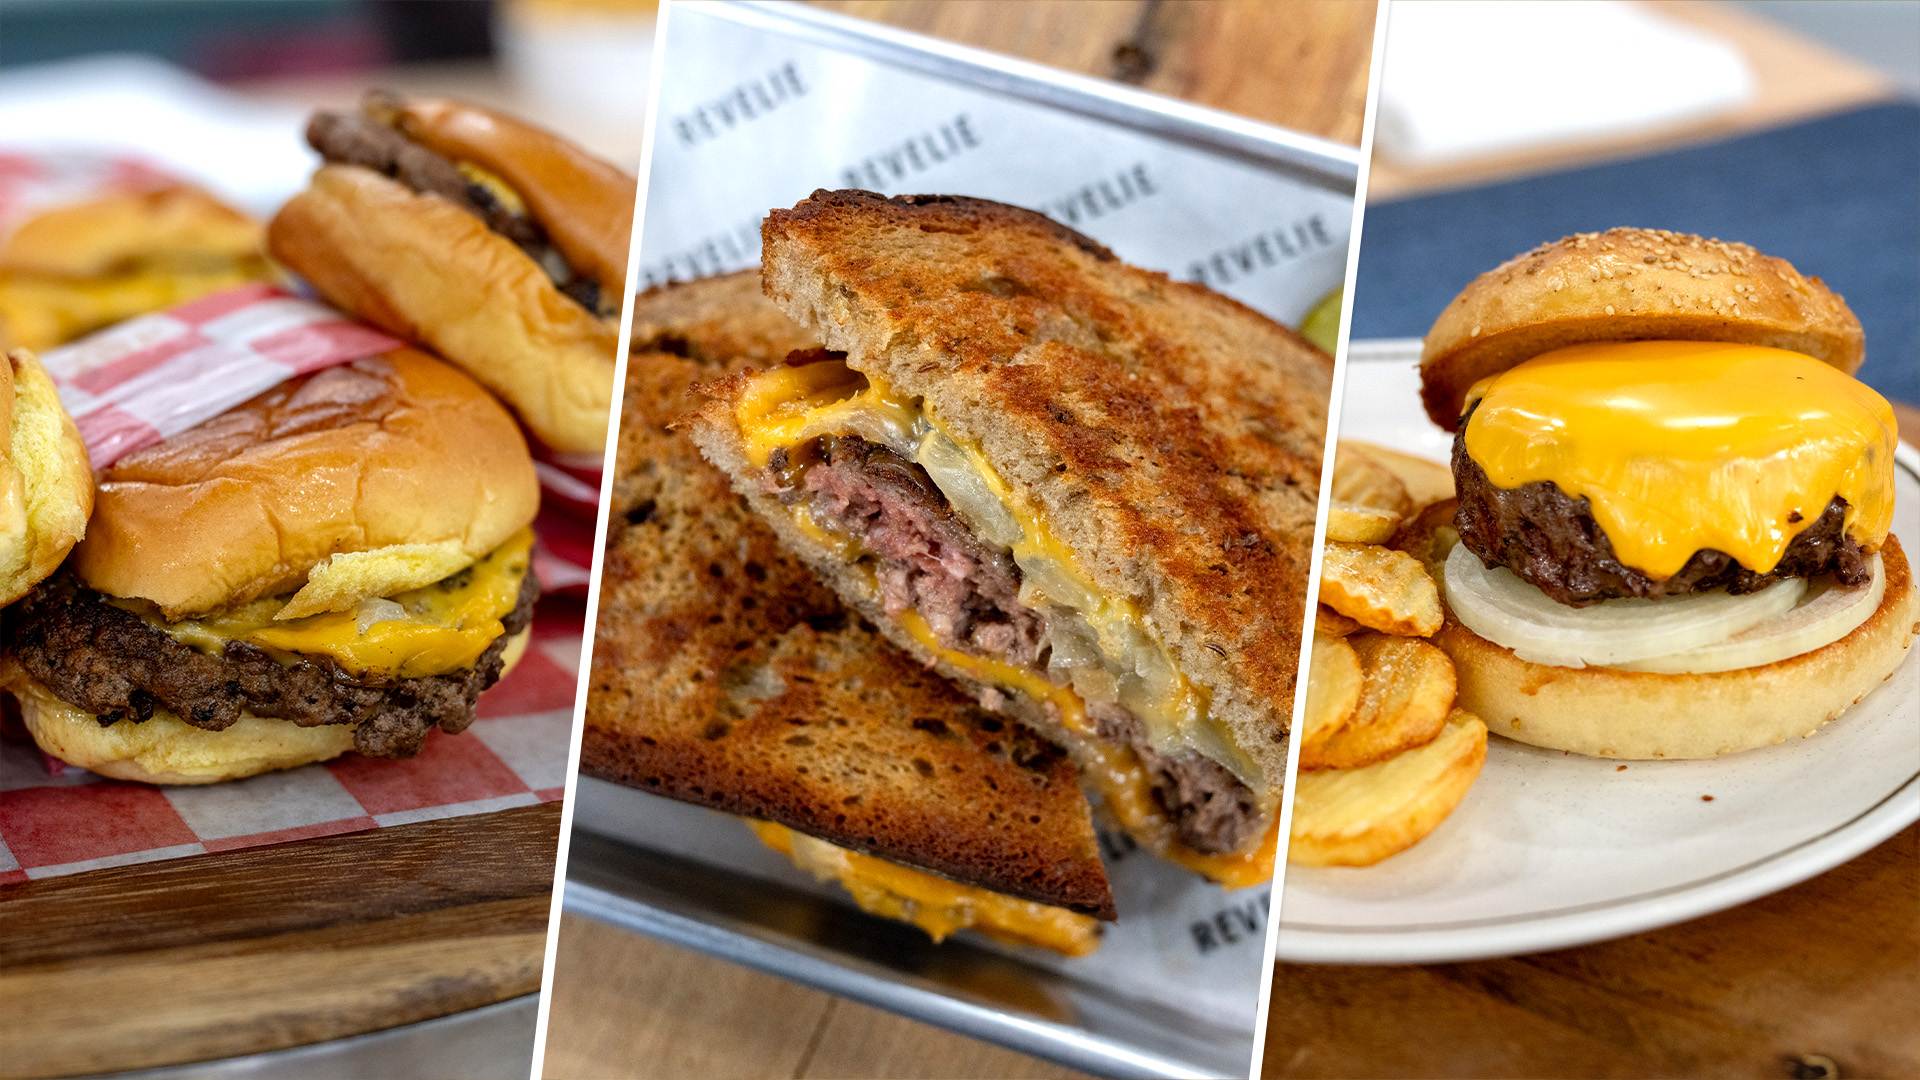 Smash burger, patty melt or classic: Which burger reigns supreme?